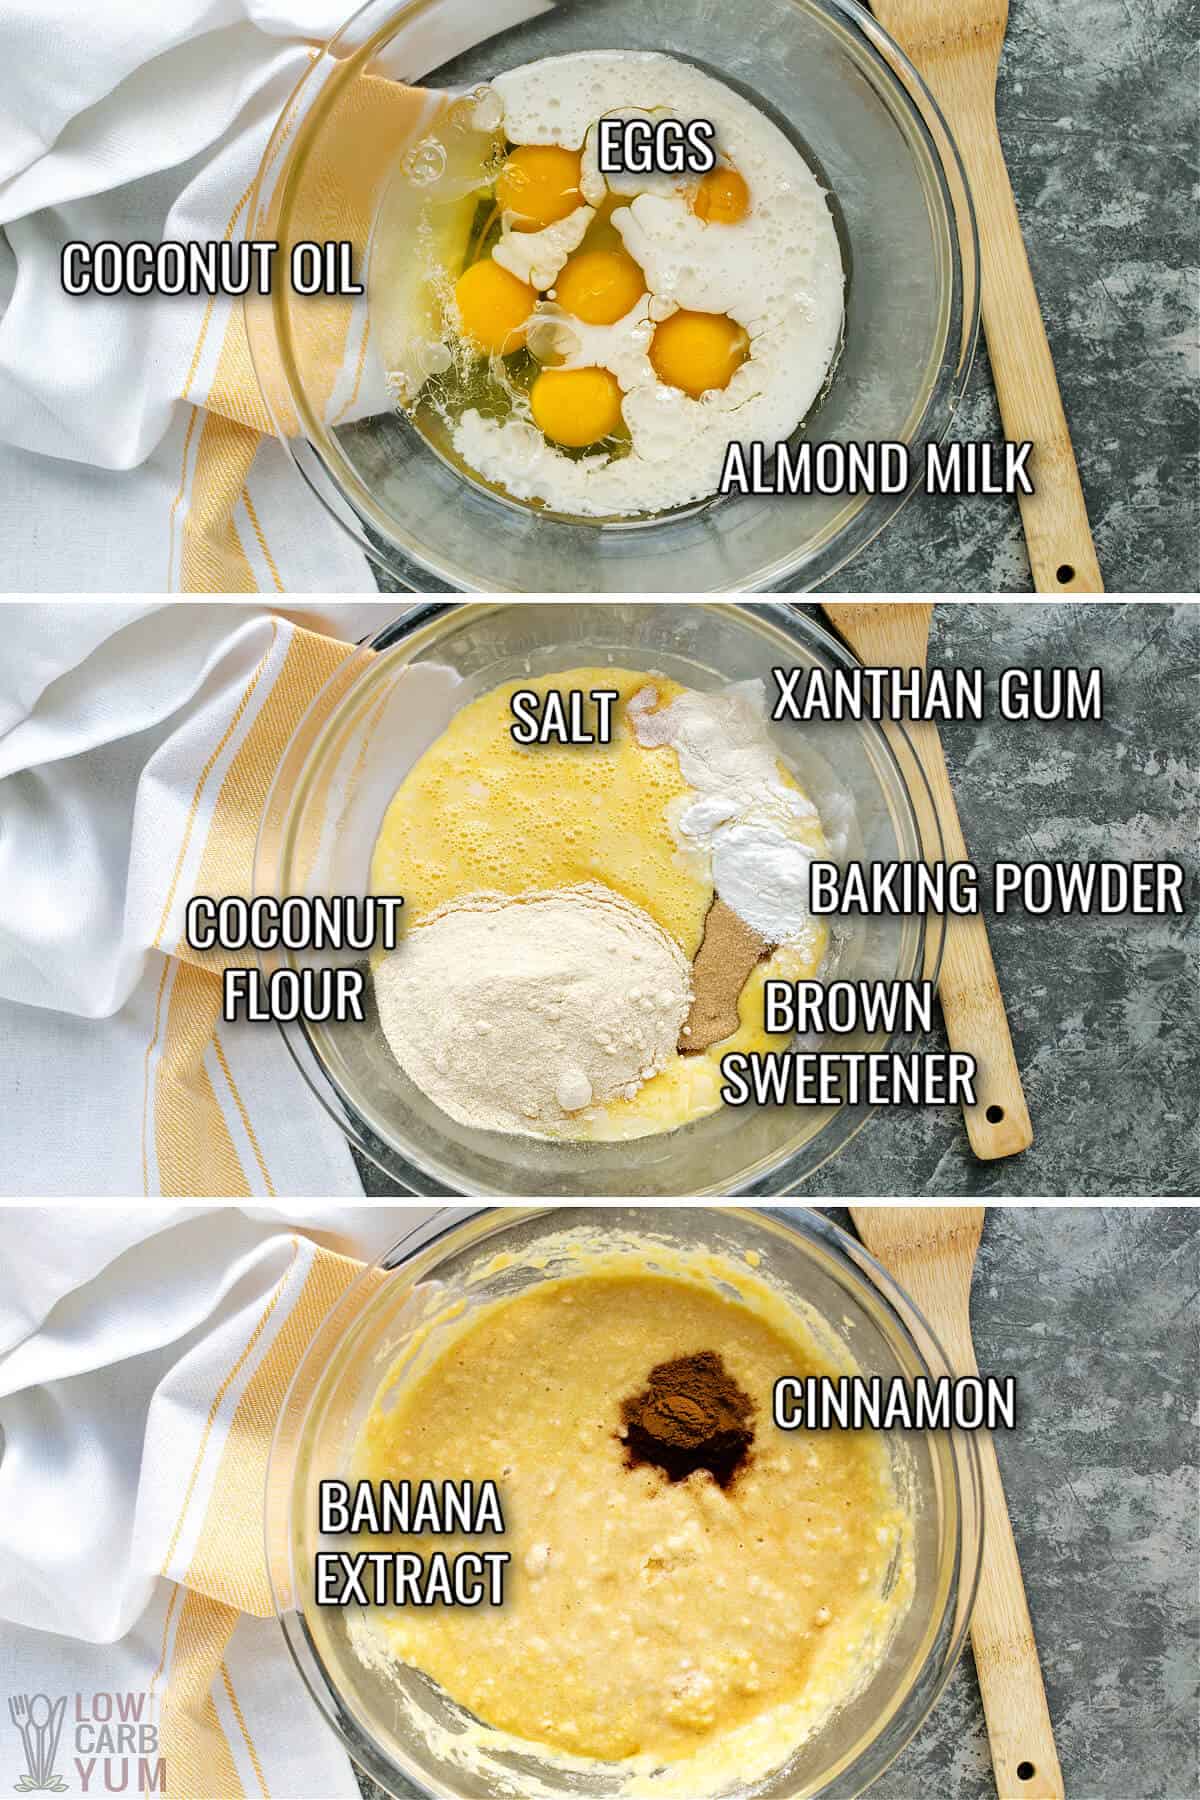 ingredients used in the recipe